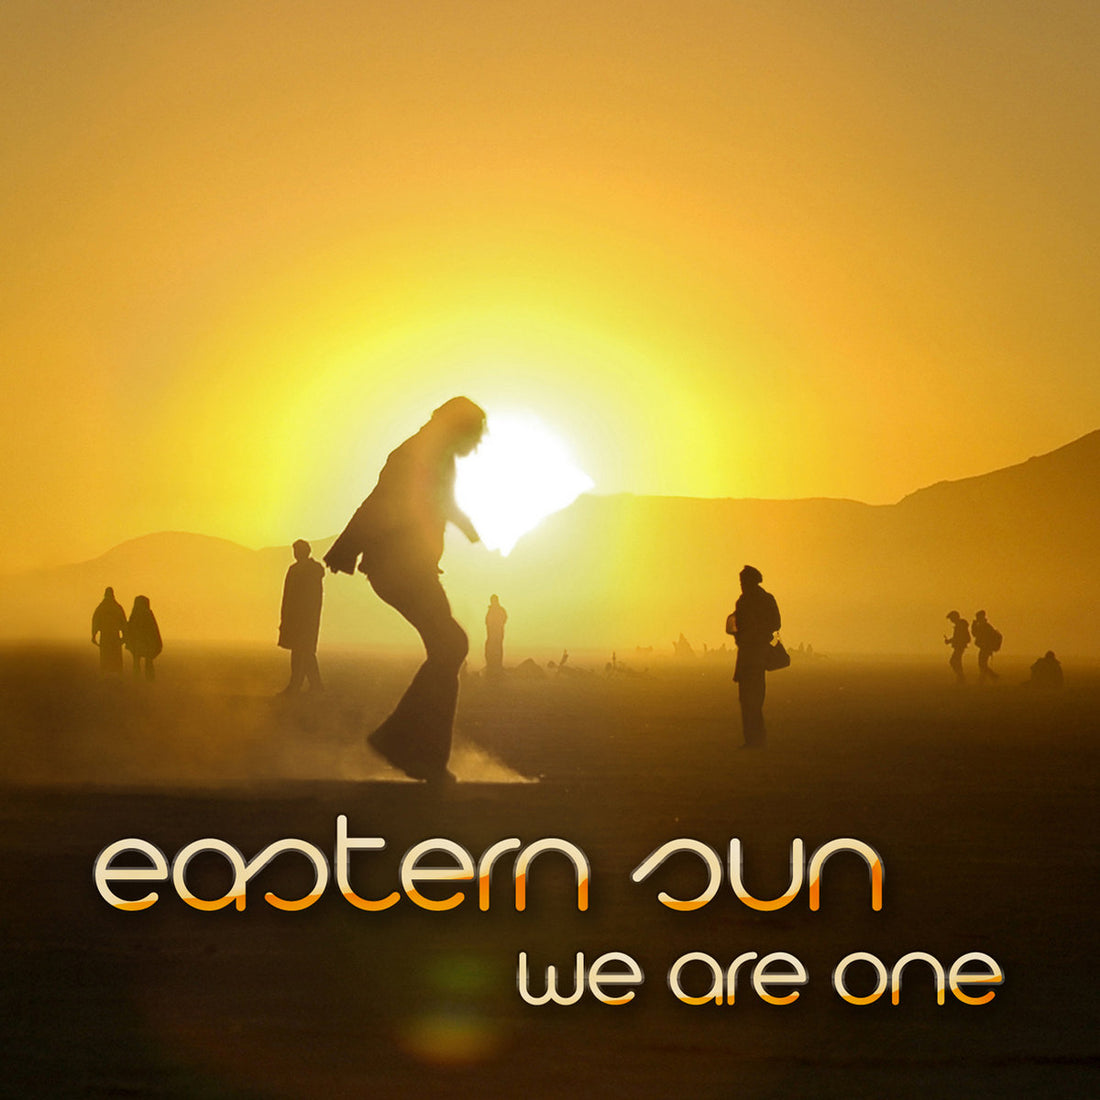 Eastern Sun - We Are One